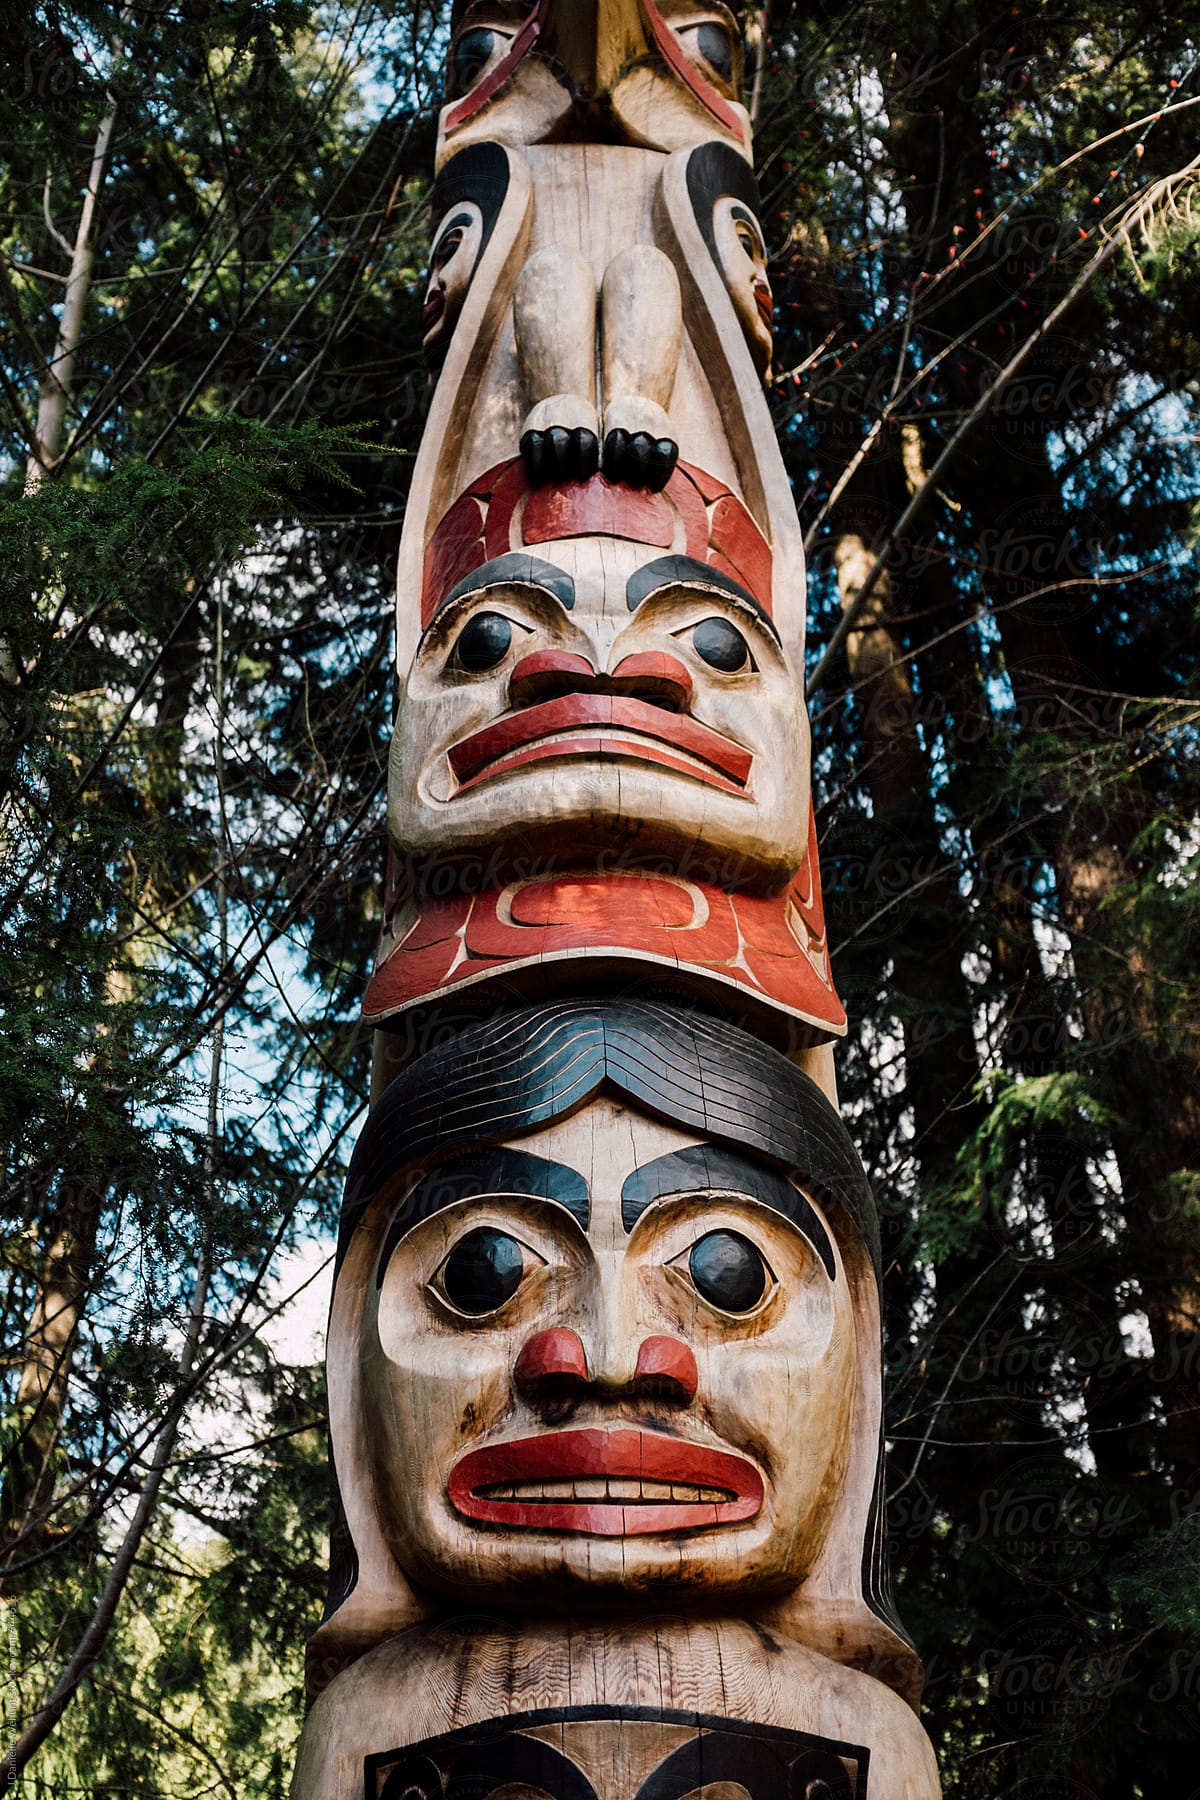 A totem pole in Capilano, Vancouver, Canada.